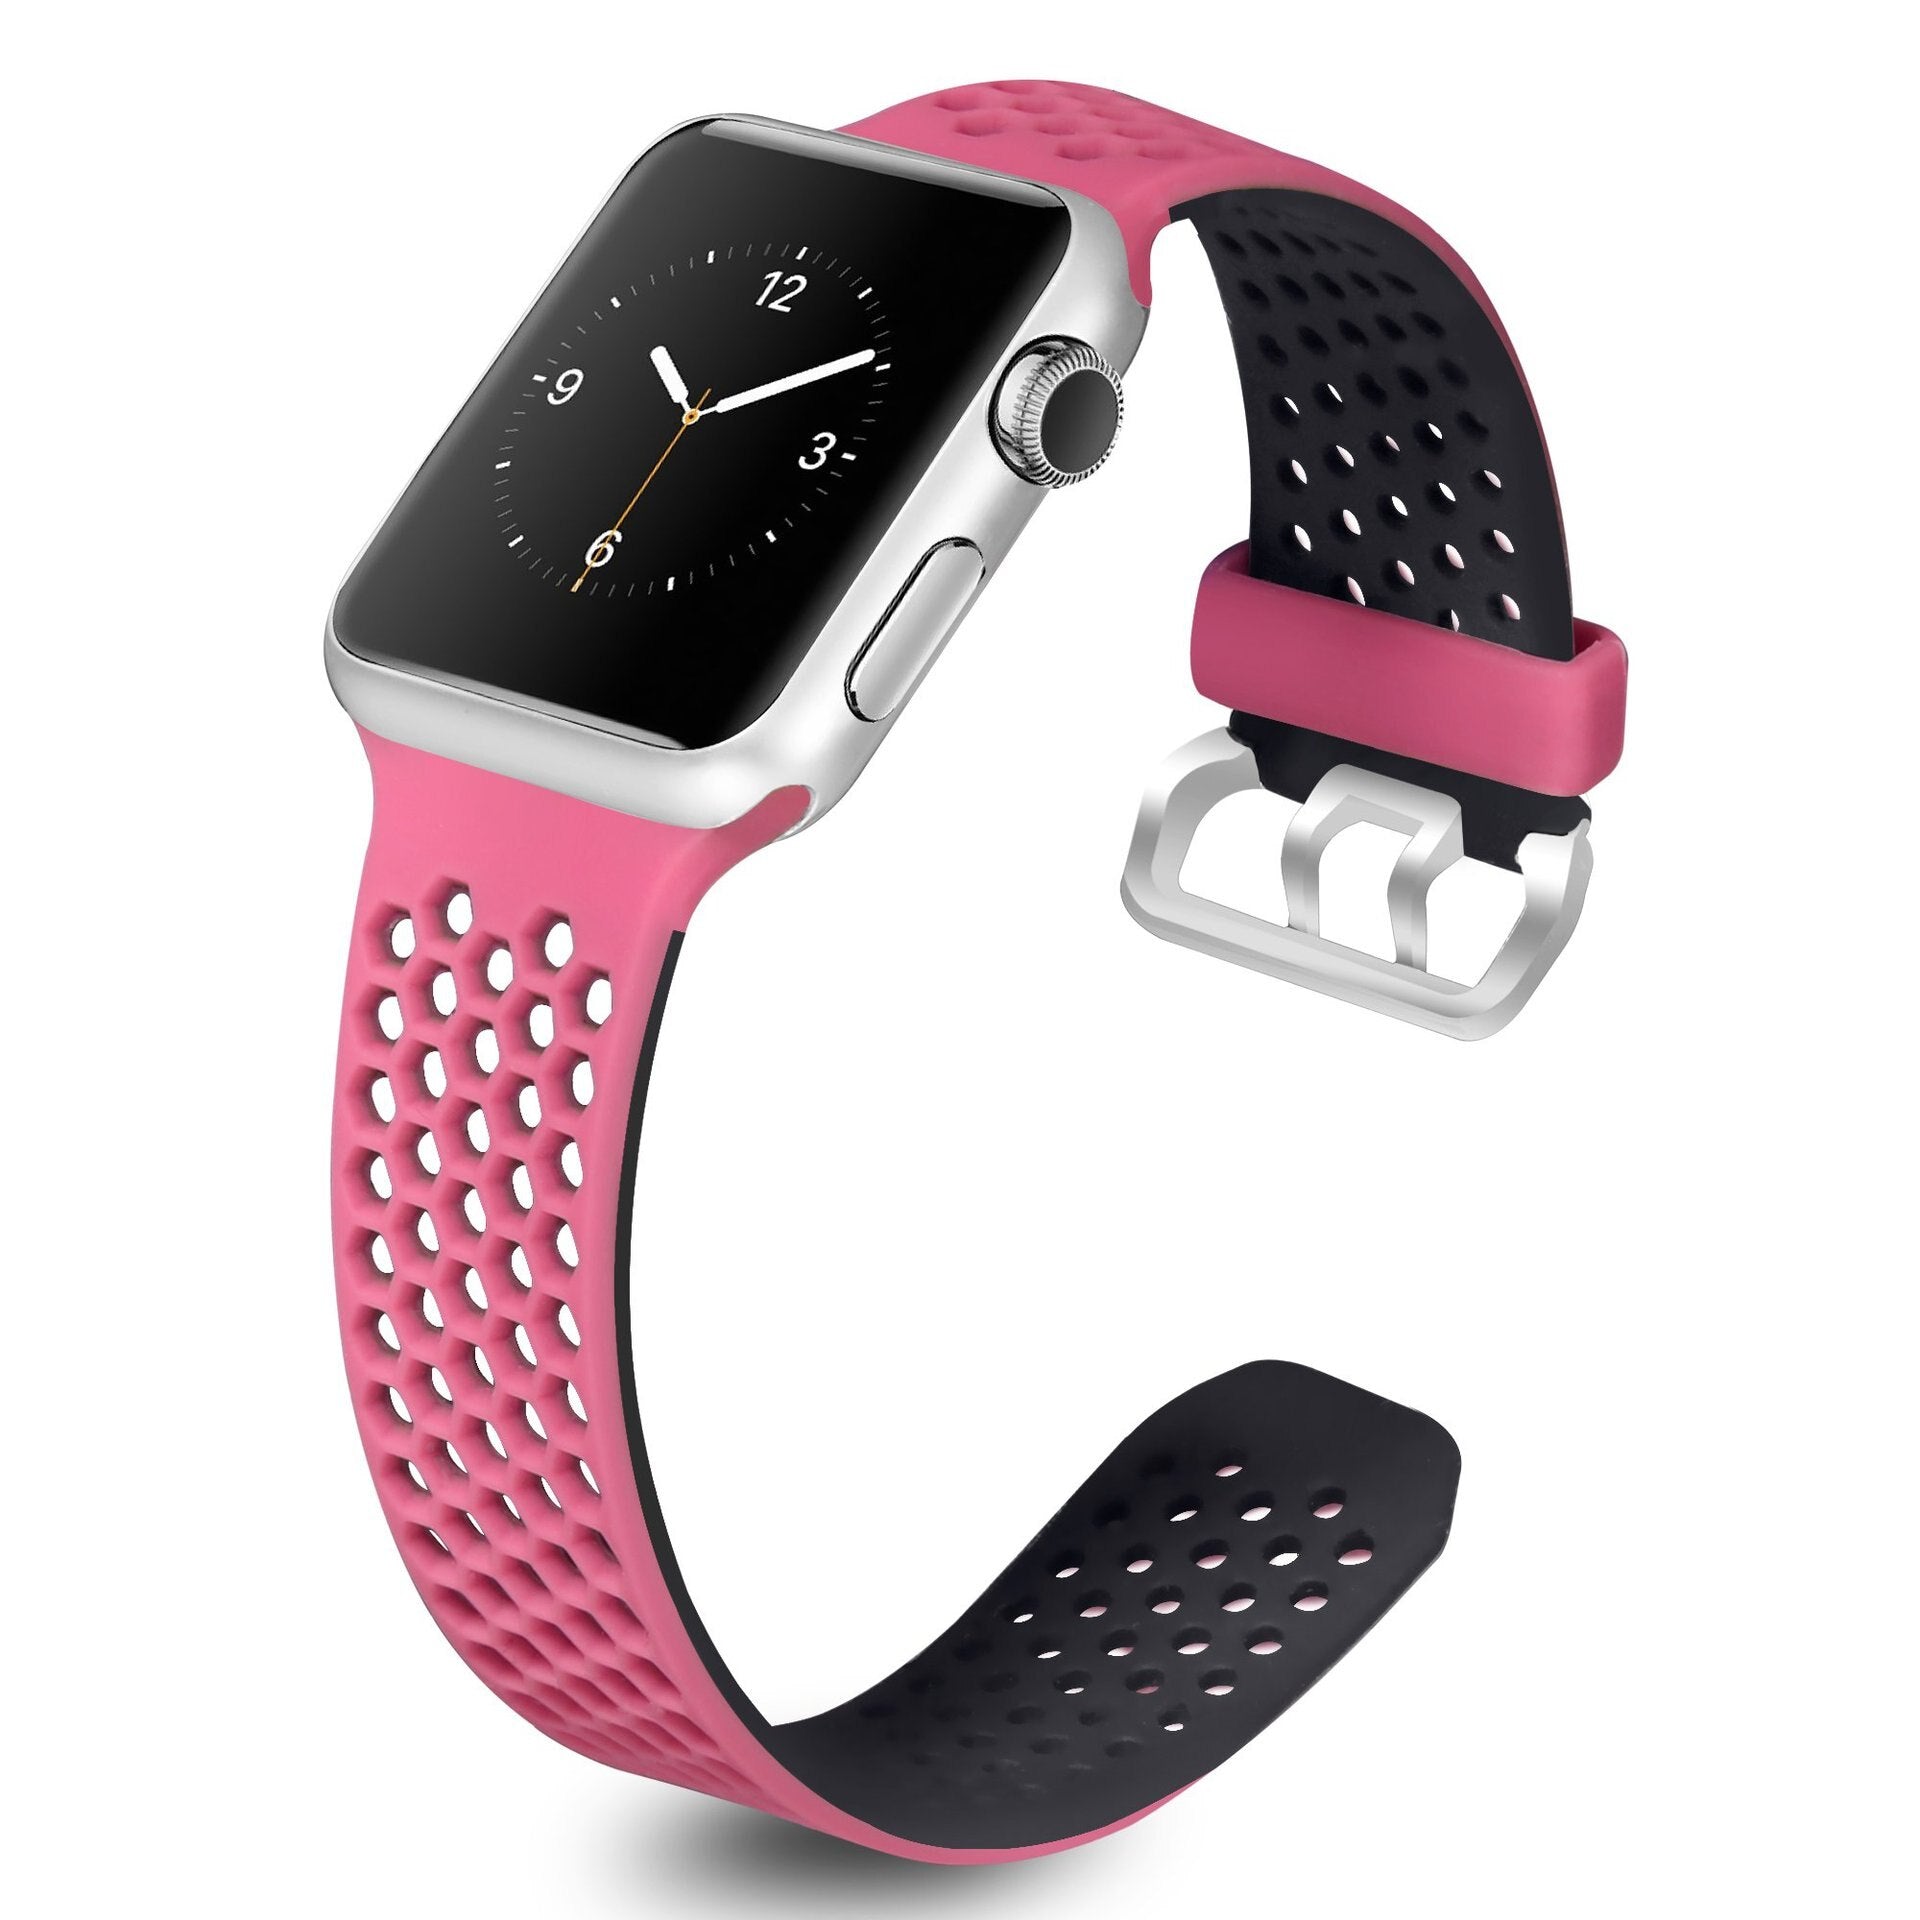 Strap for Apple Watch 5 Band 40mm 44mm iWatch series 4 5 6 SE Sport Belt Silicone bracelet for Apple watch band 42mm 38mm - 200000127 United States / pink / 38 or 40 mm Find Epic Store